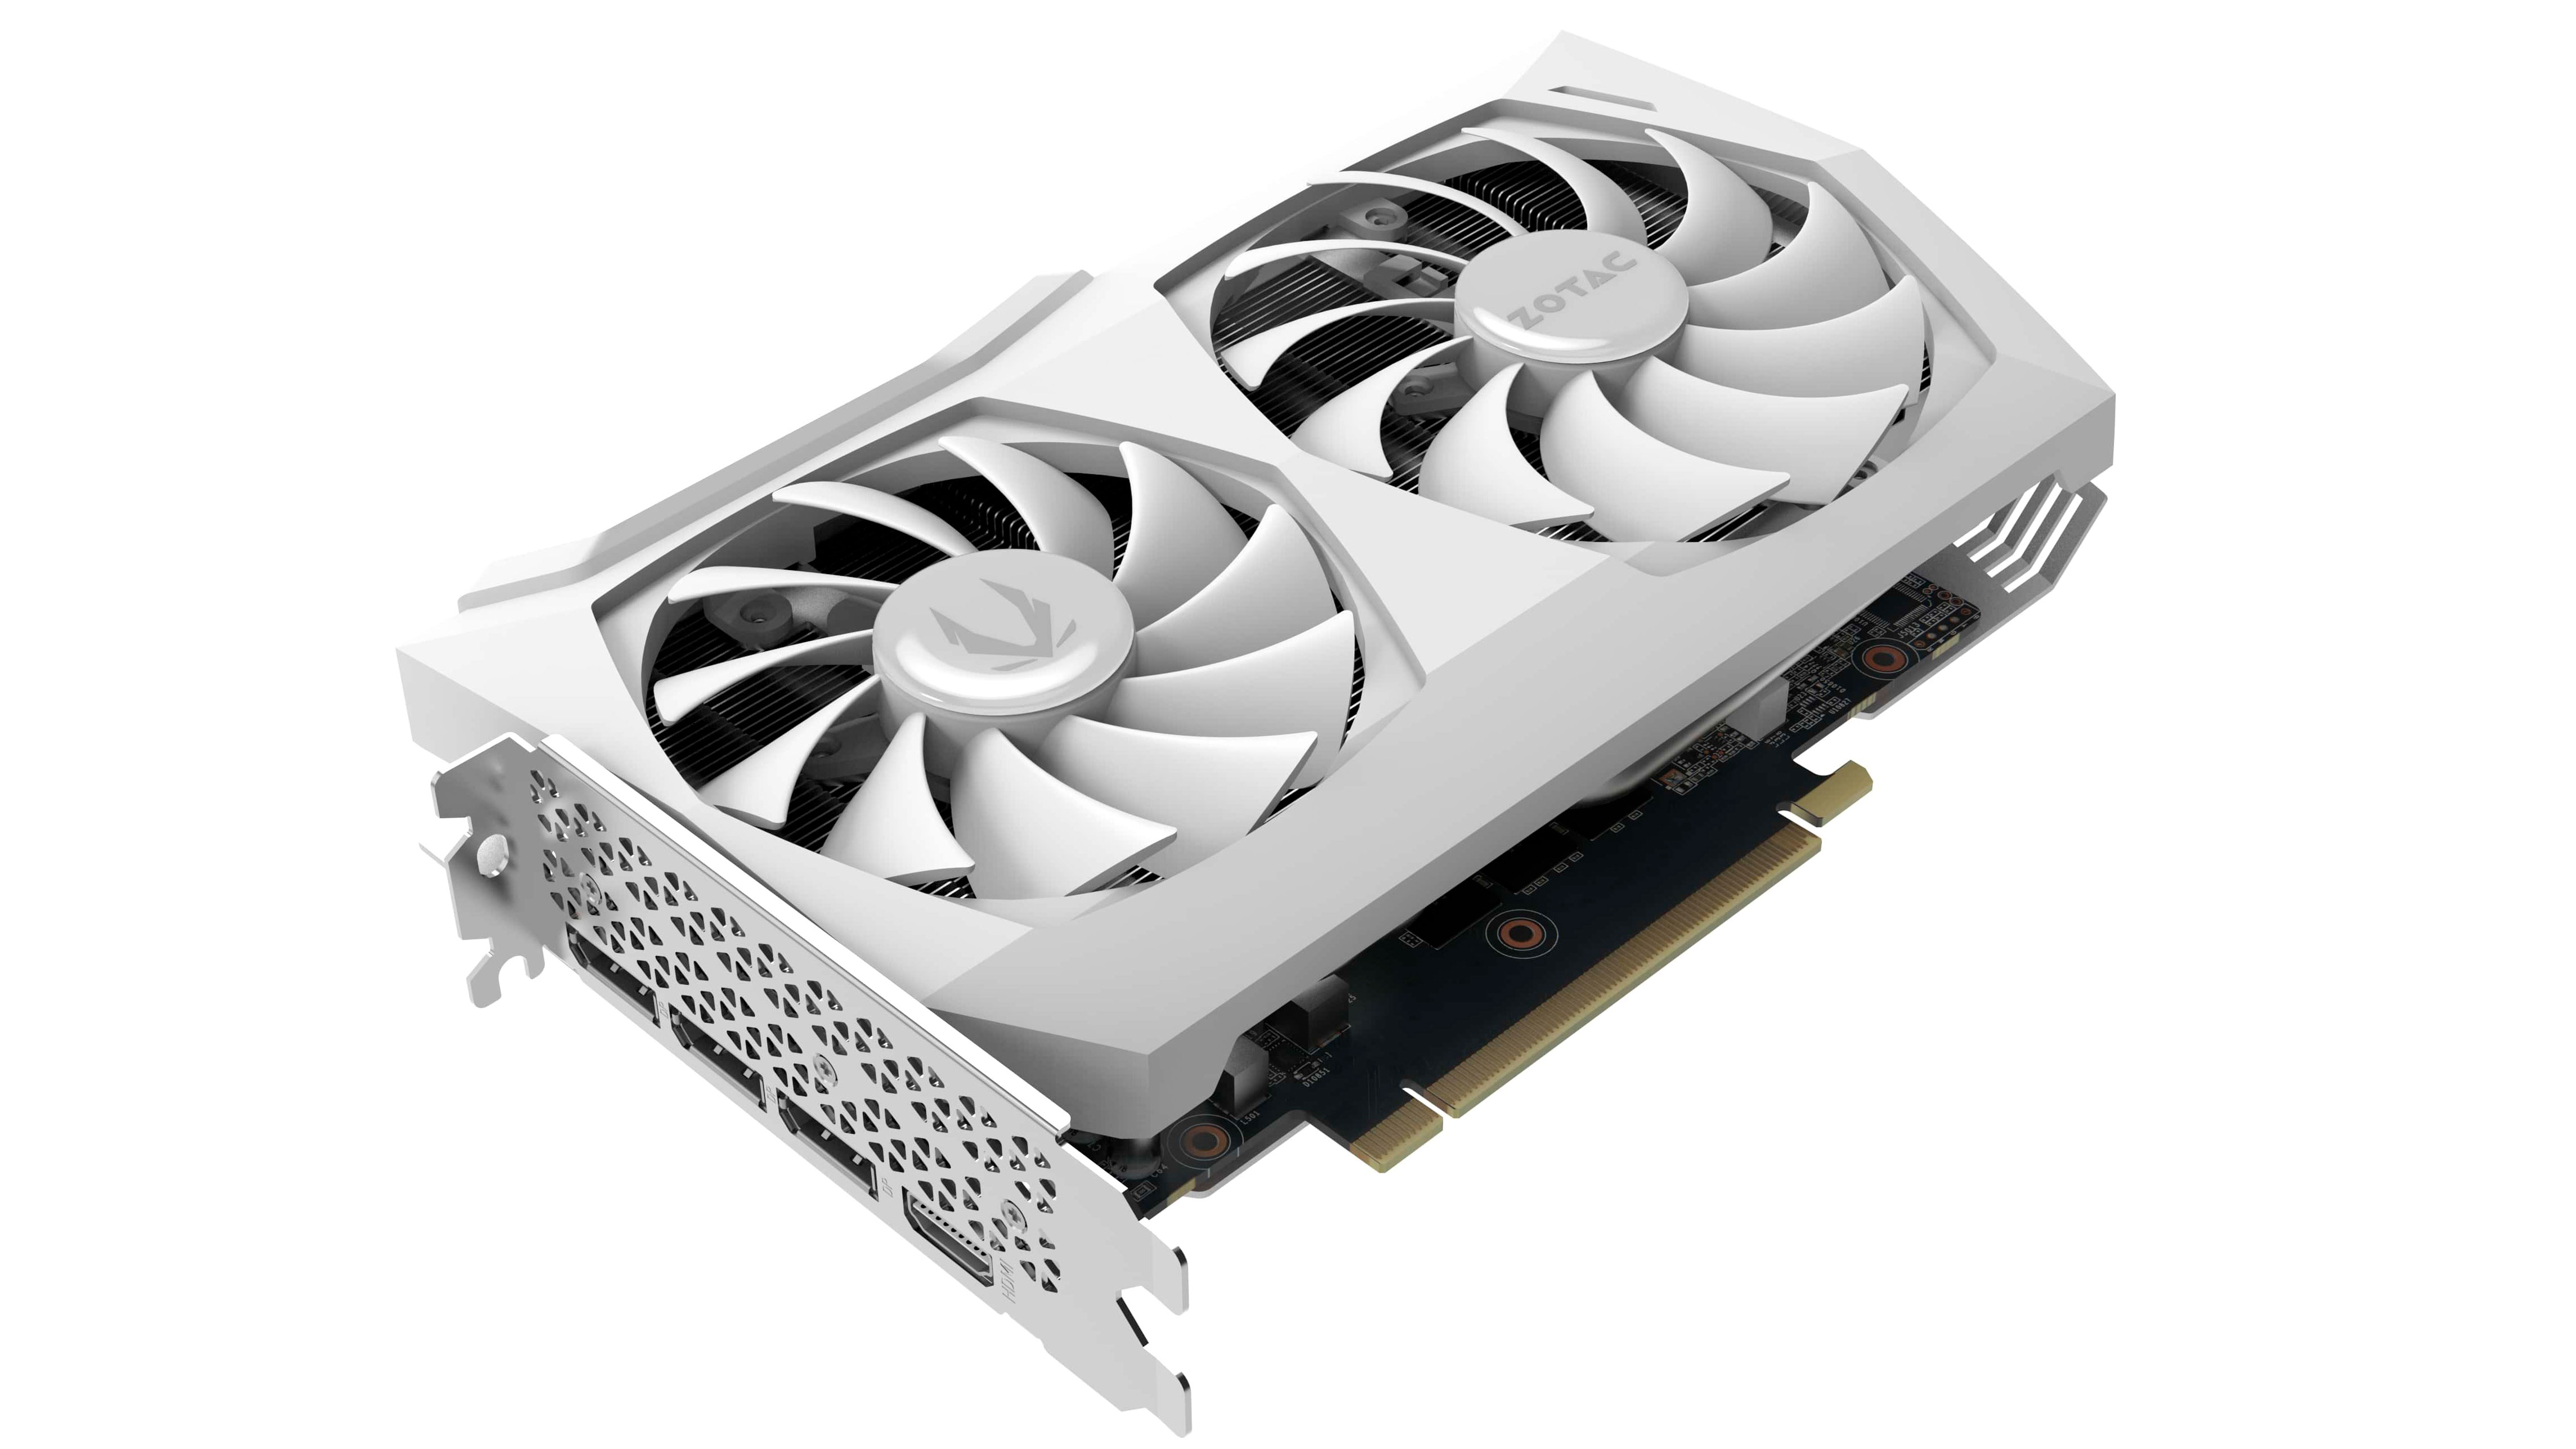 Zotac's White GeForce RTX 3070 Is Fit For A Christmas Build | Tom's Hardware